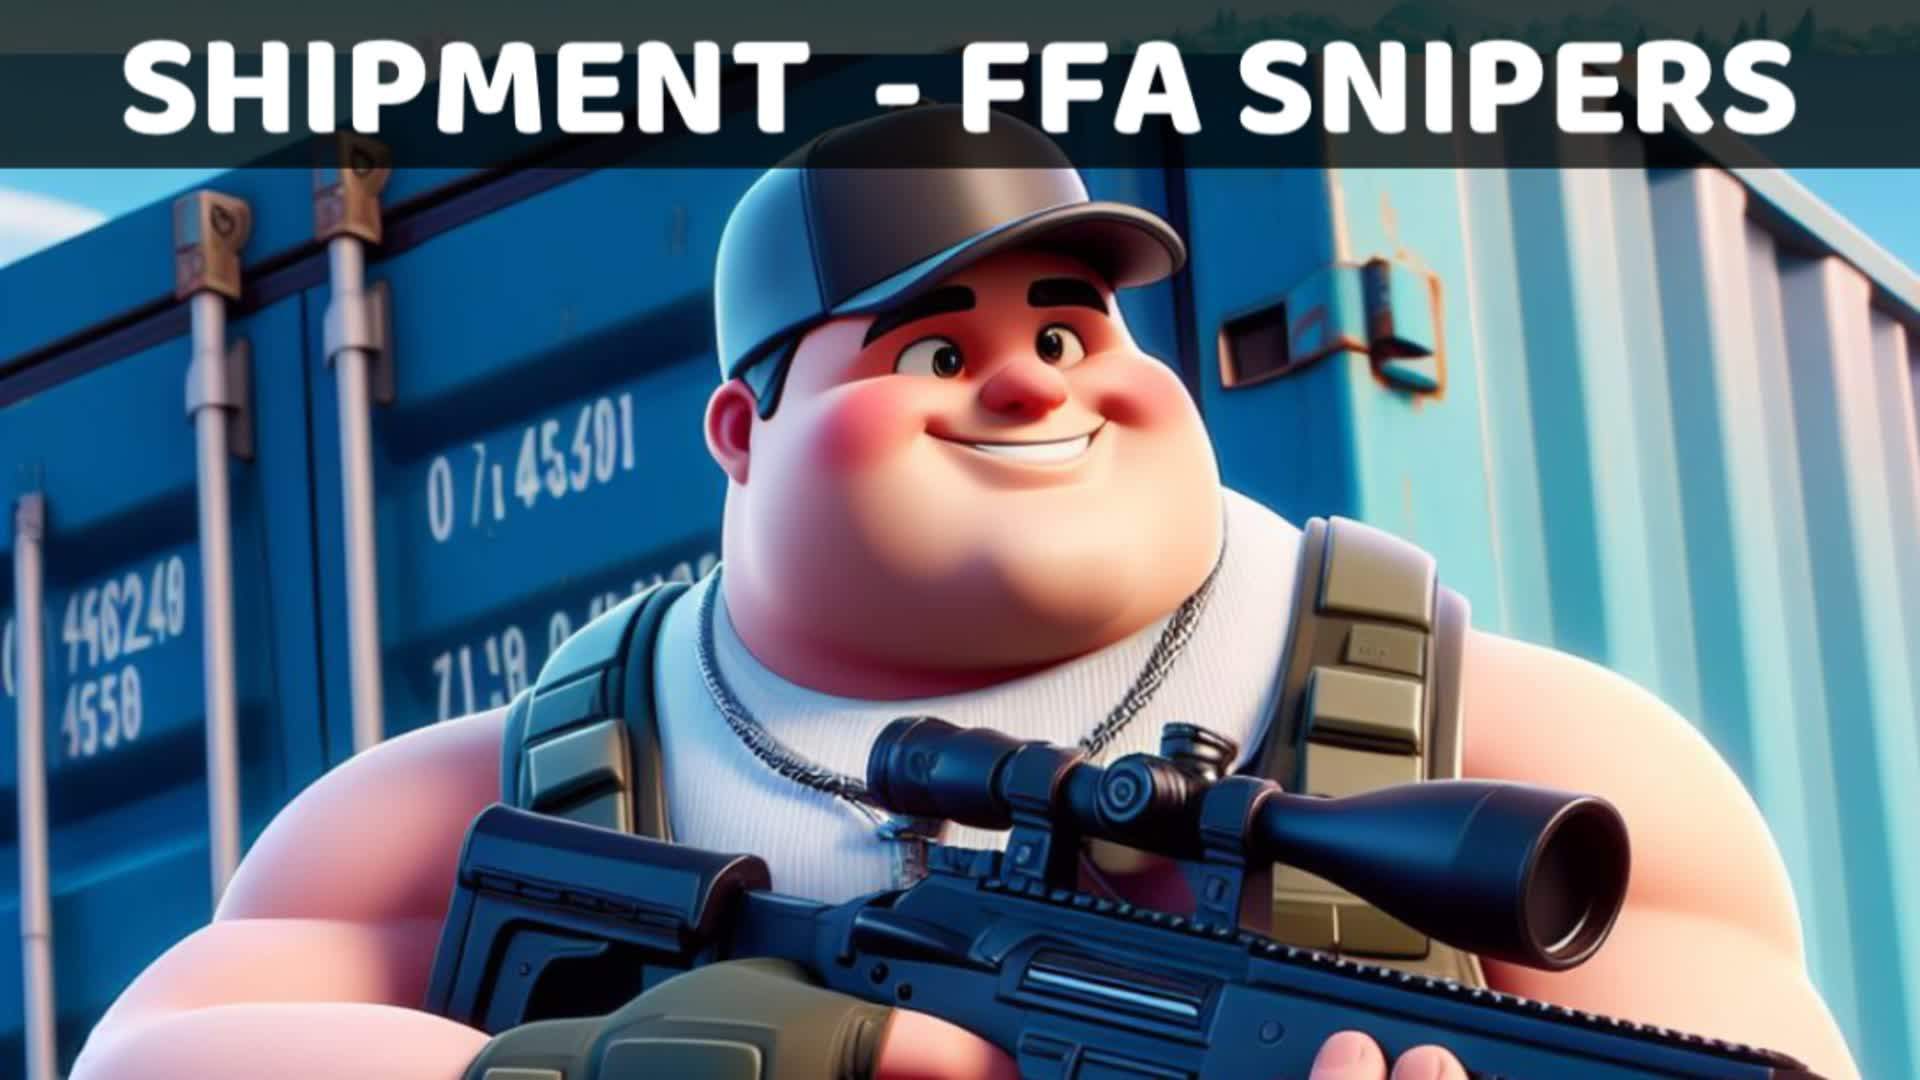 SHIPMENT - FFA SNIPERS ONLY